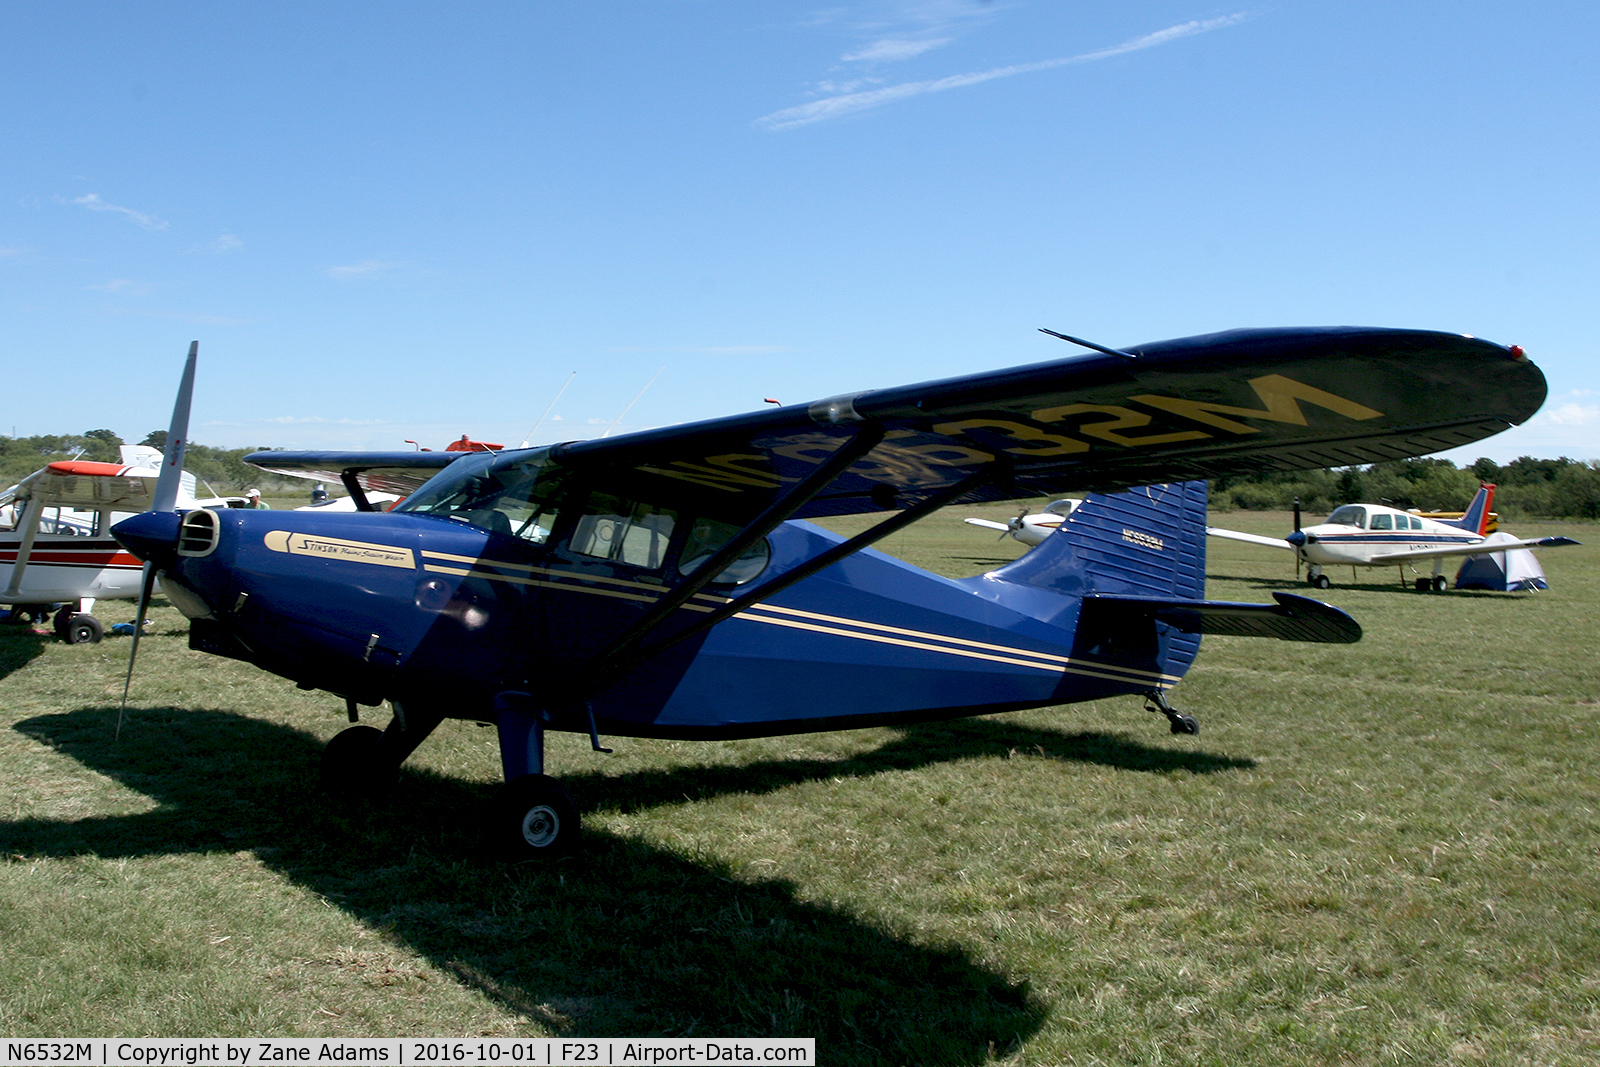 N6532M, 1948 Stinson 108 Voyager C/N 108-4532, At the 2016 Ranger, Texas Fly-in